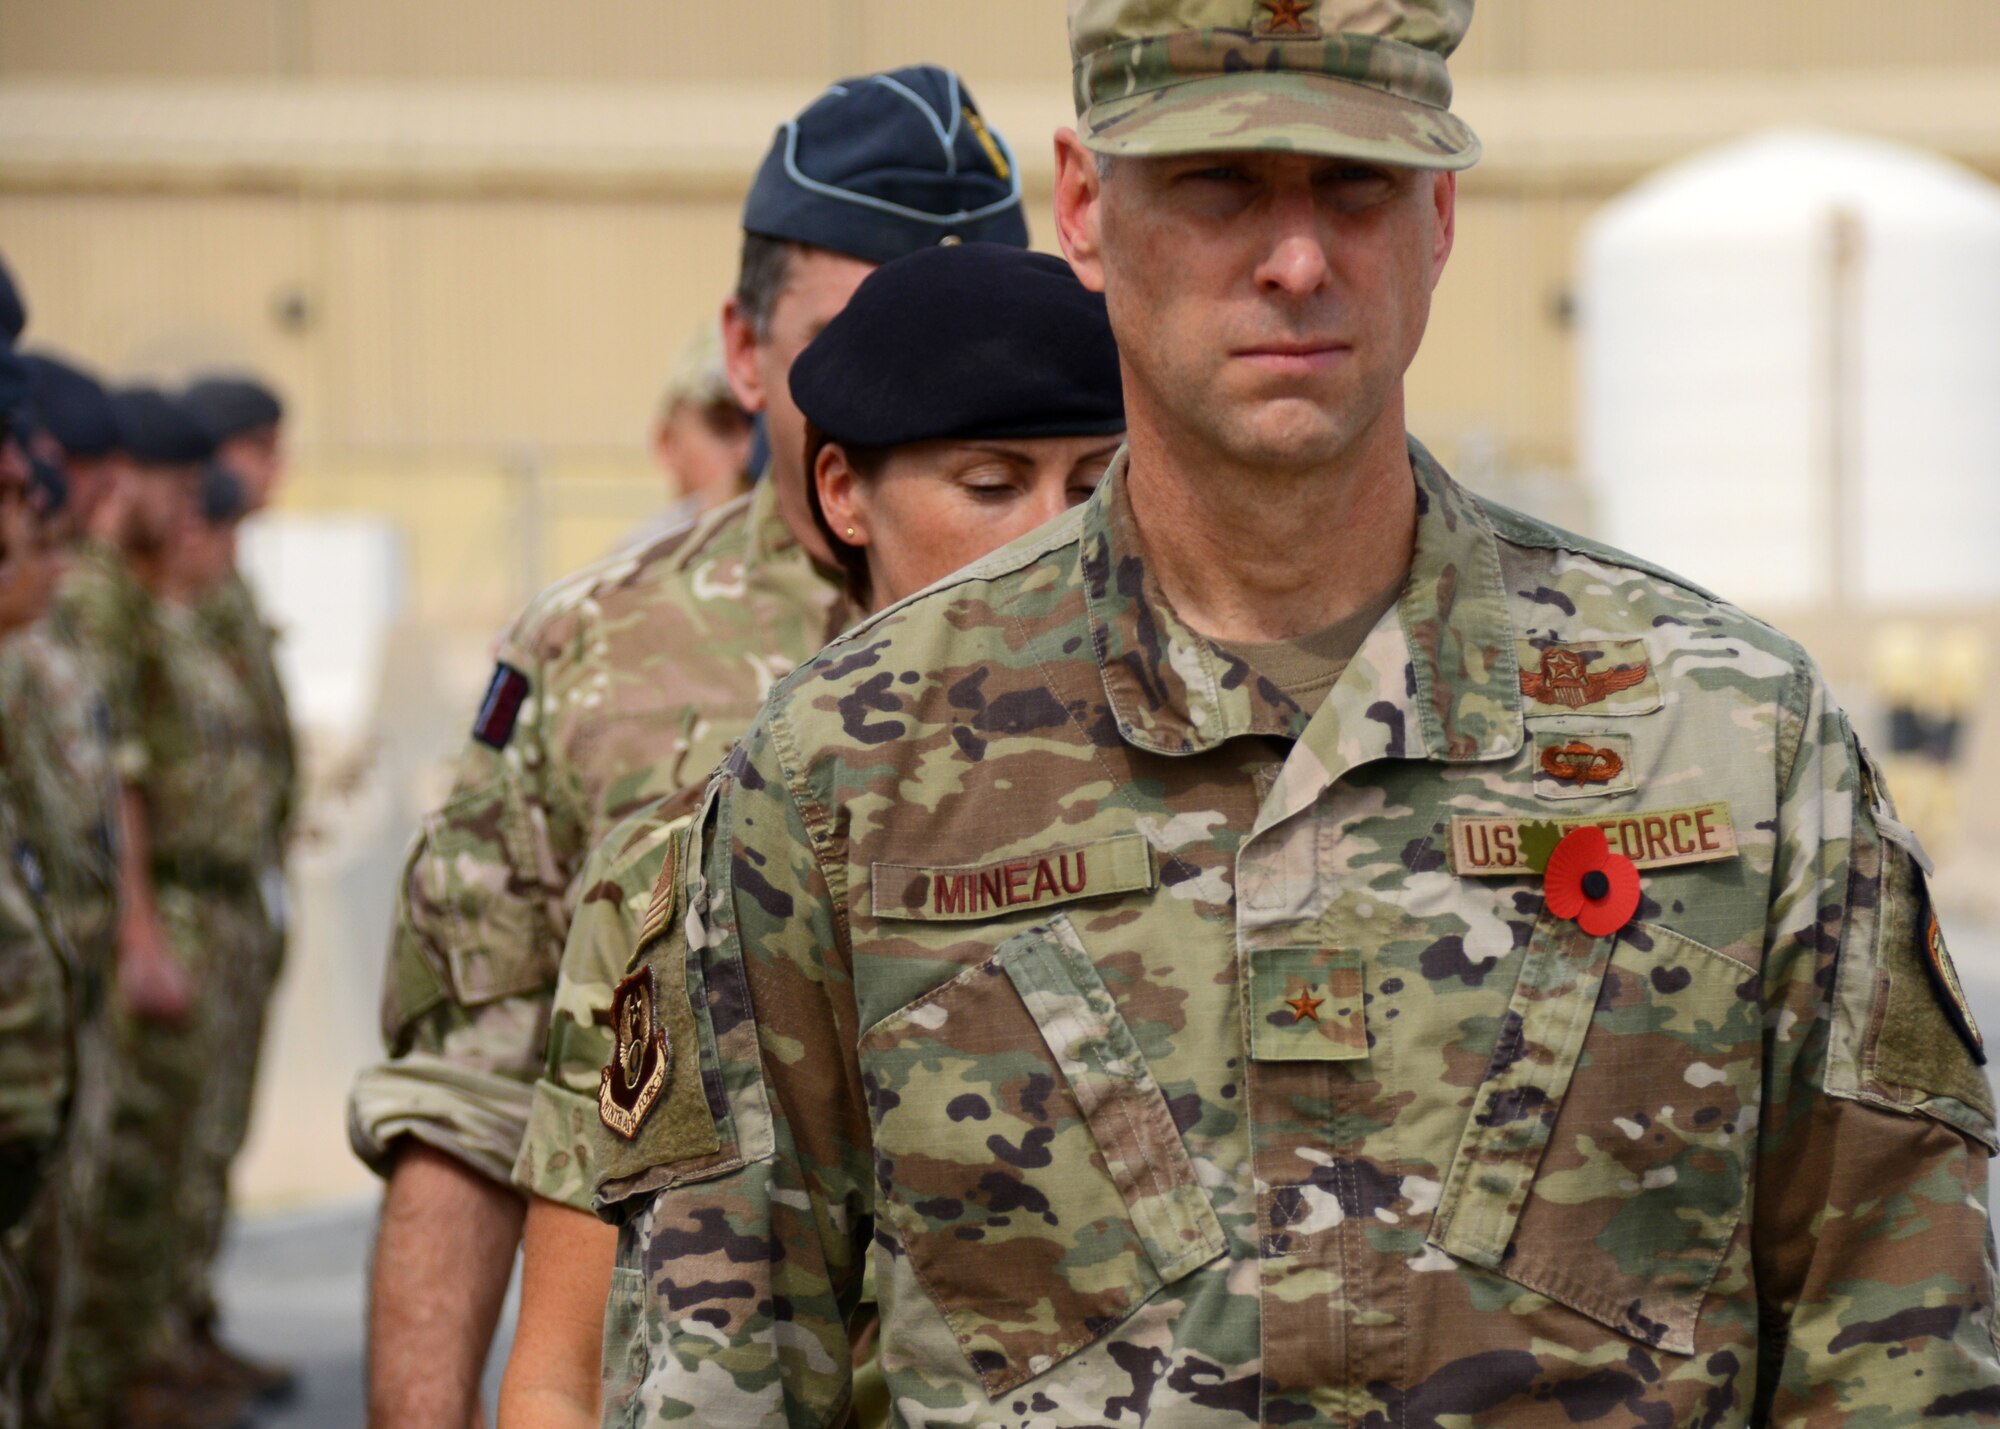 Brig. Gen. David Mineau, Ninth Air Force Deputy commander, departs from the Remembrance Day formation at an undisclosed location within the U.S. Central Command area of responsibility.